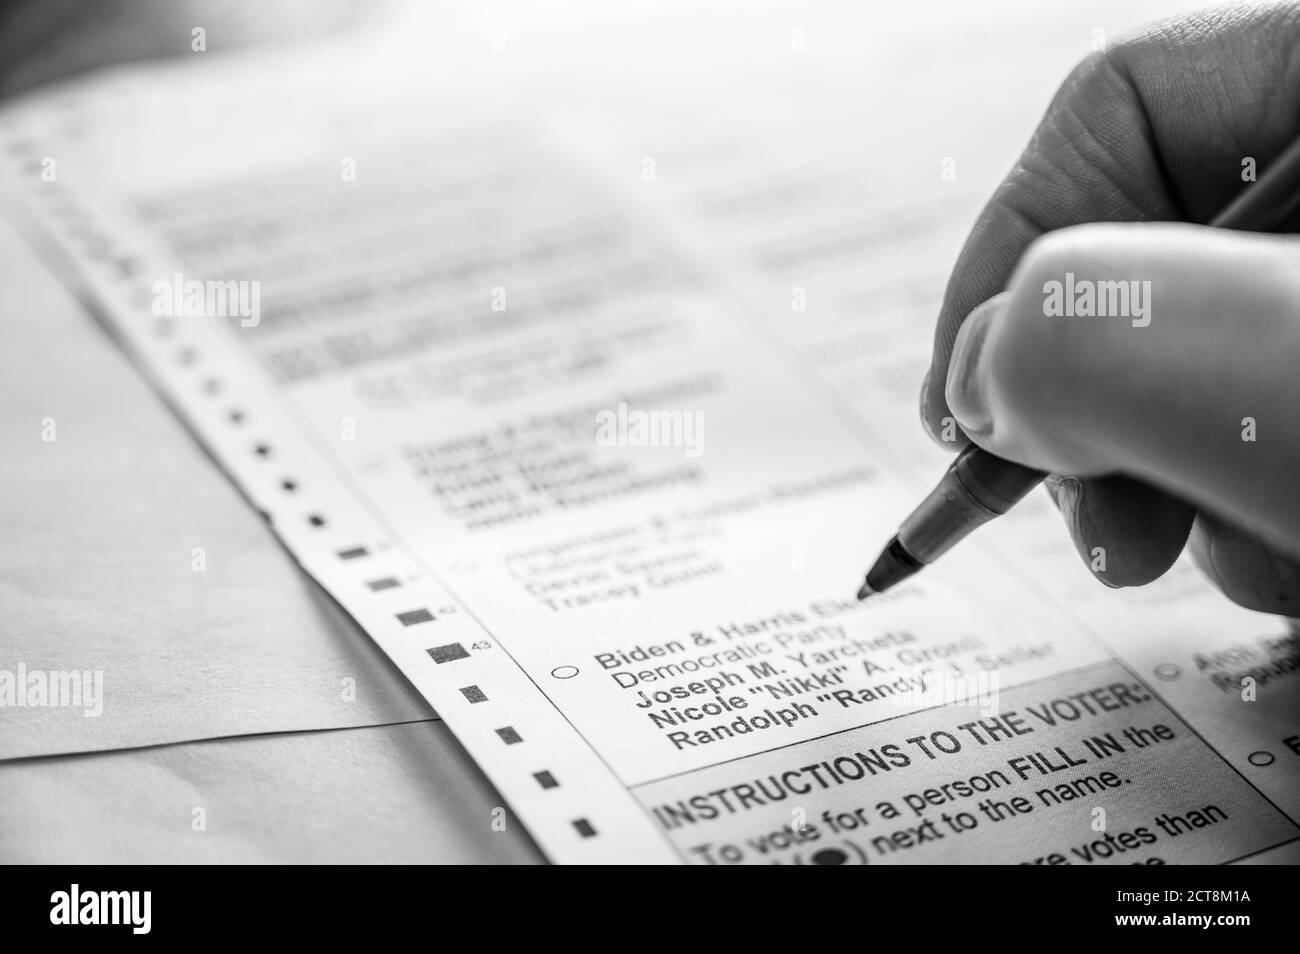 Official 2020 US general election ballot for president Stock Photo